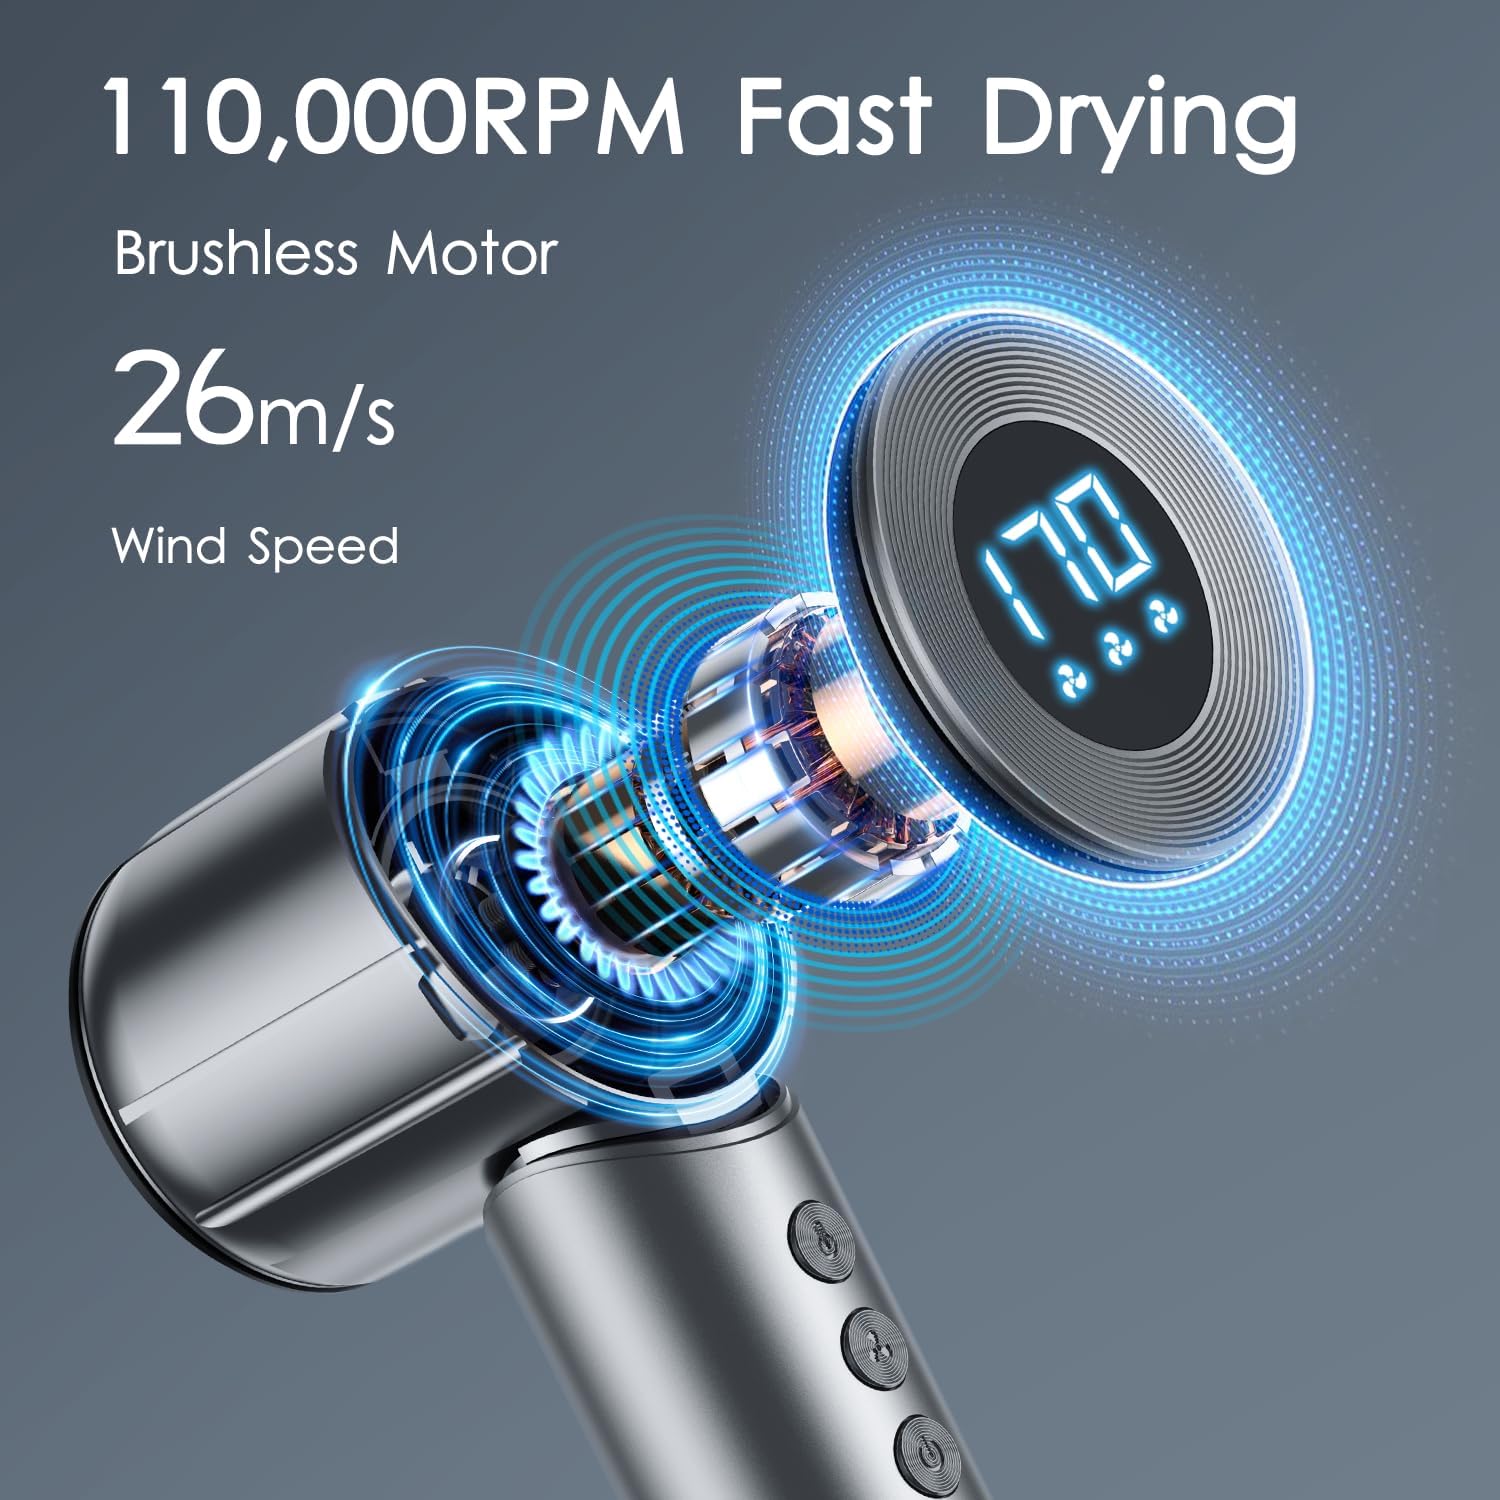 Hair Blow Dryer, Ionic Hair Dryer with Hair Care Module, Professional Hairdryer High-Speed 110, 000 RPM Fast Drying